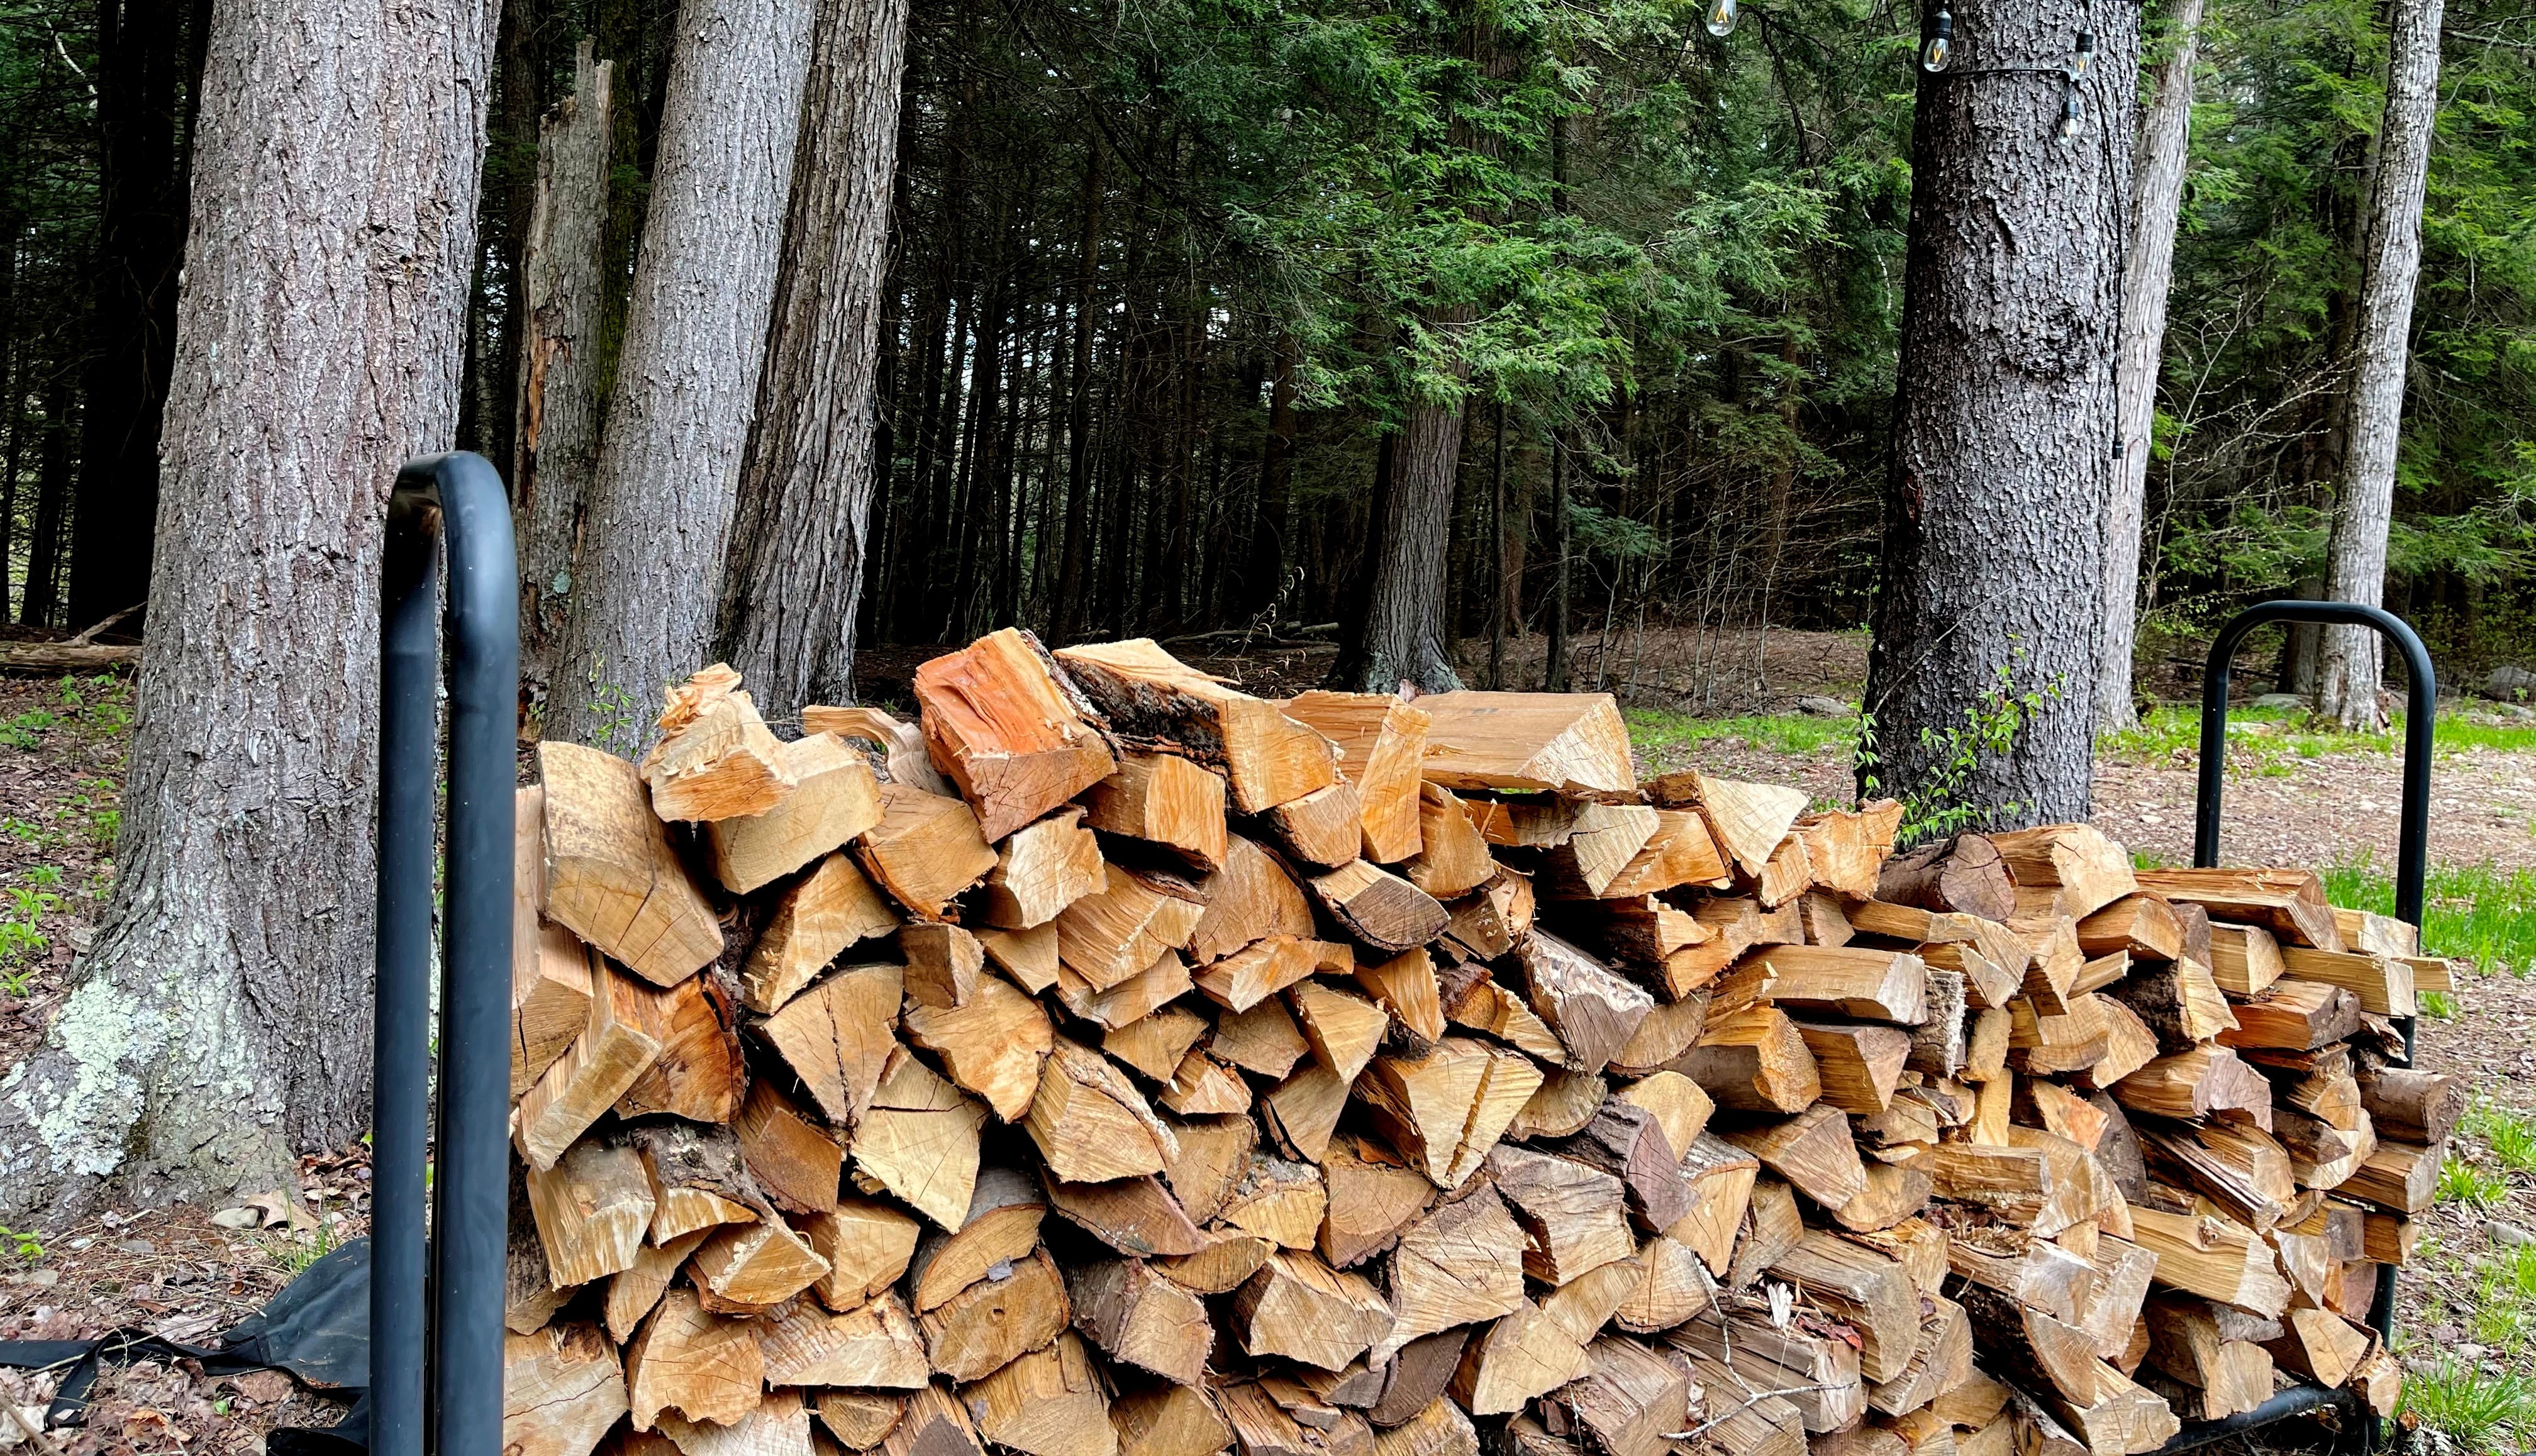 Plenty of wood for the wood stove and fire pit!